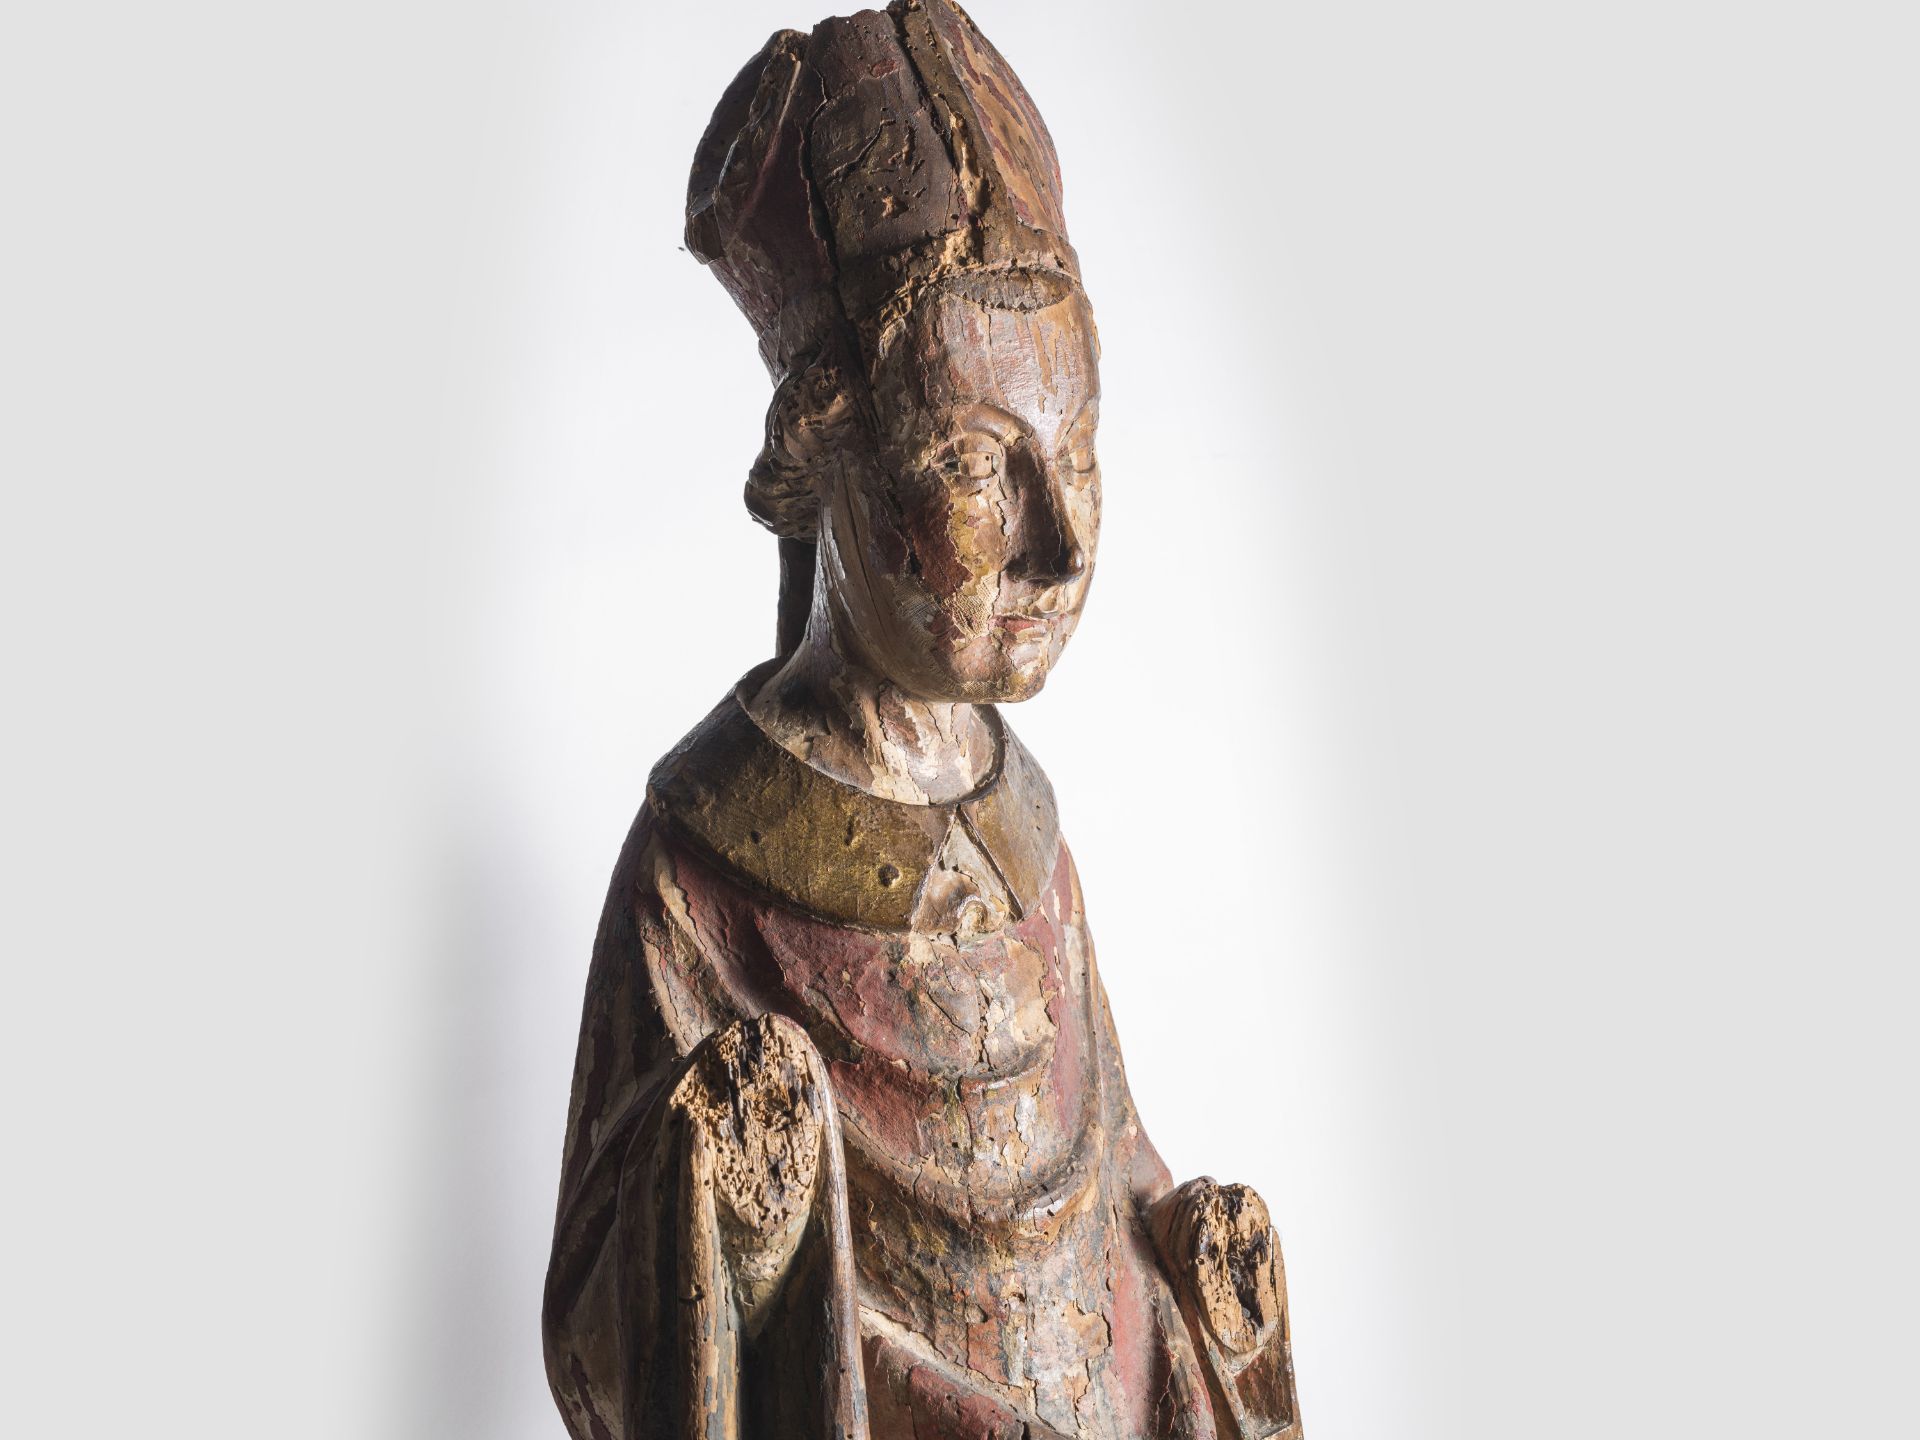 Hl. Bishop in Soft Style, Tyrol around 1400, Carved lime wood - Image 3 of 7